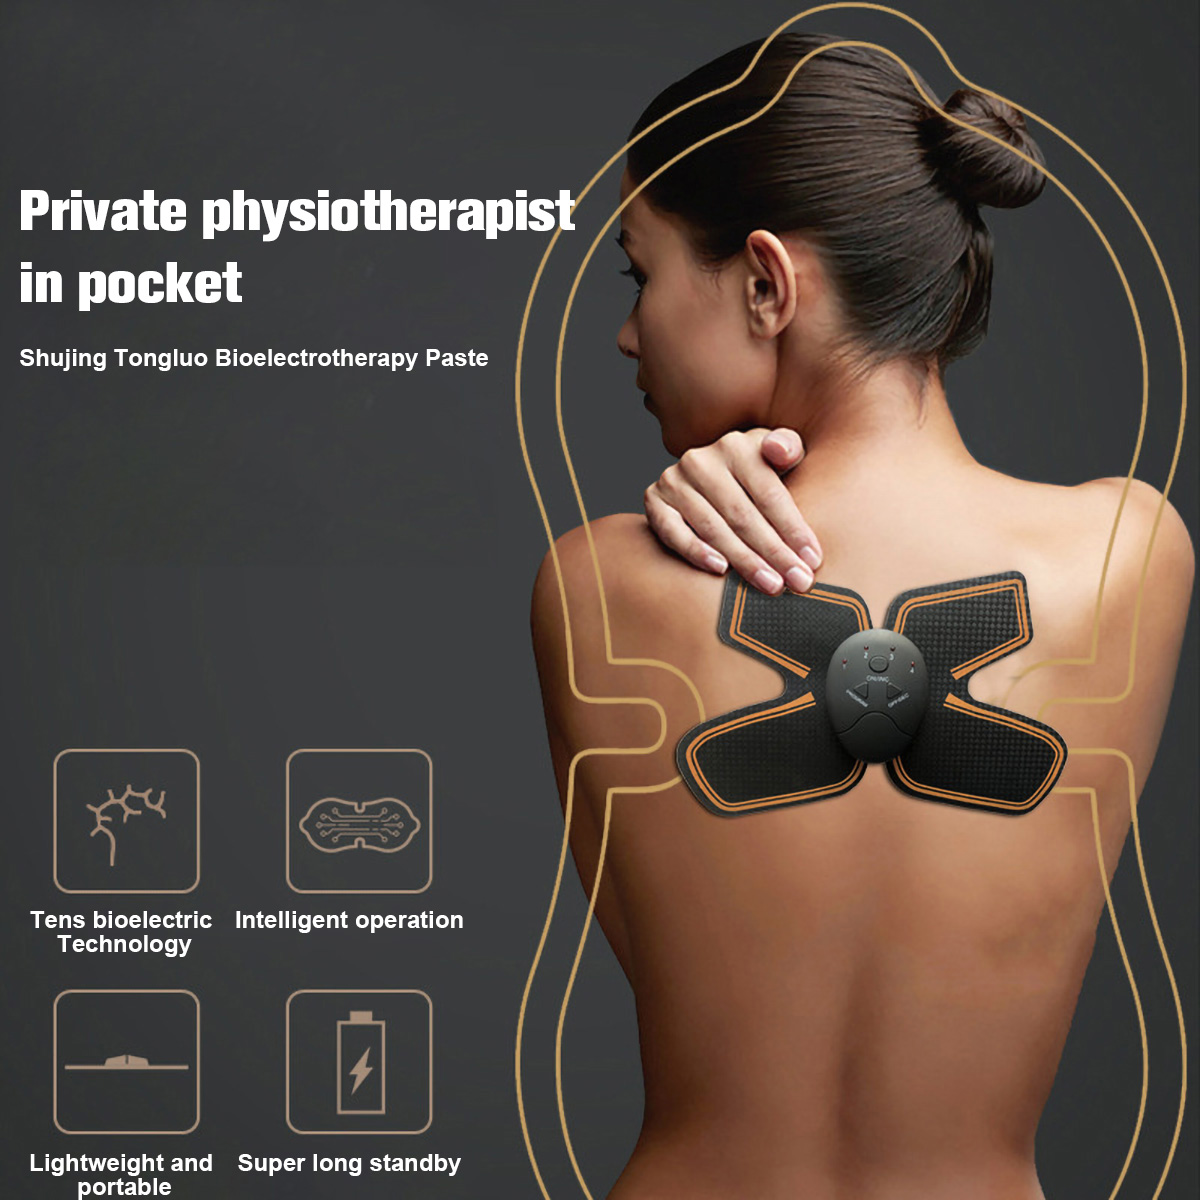 KALAOD-Neck-Massager-Patch-Paste-Micro-current-Pulse-Mulfunctional-Mini-Portable-Body-Muscle-Massage-1578495-1